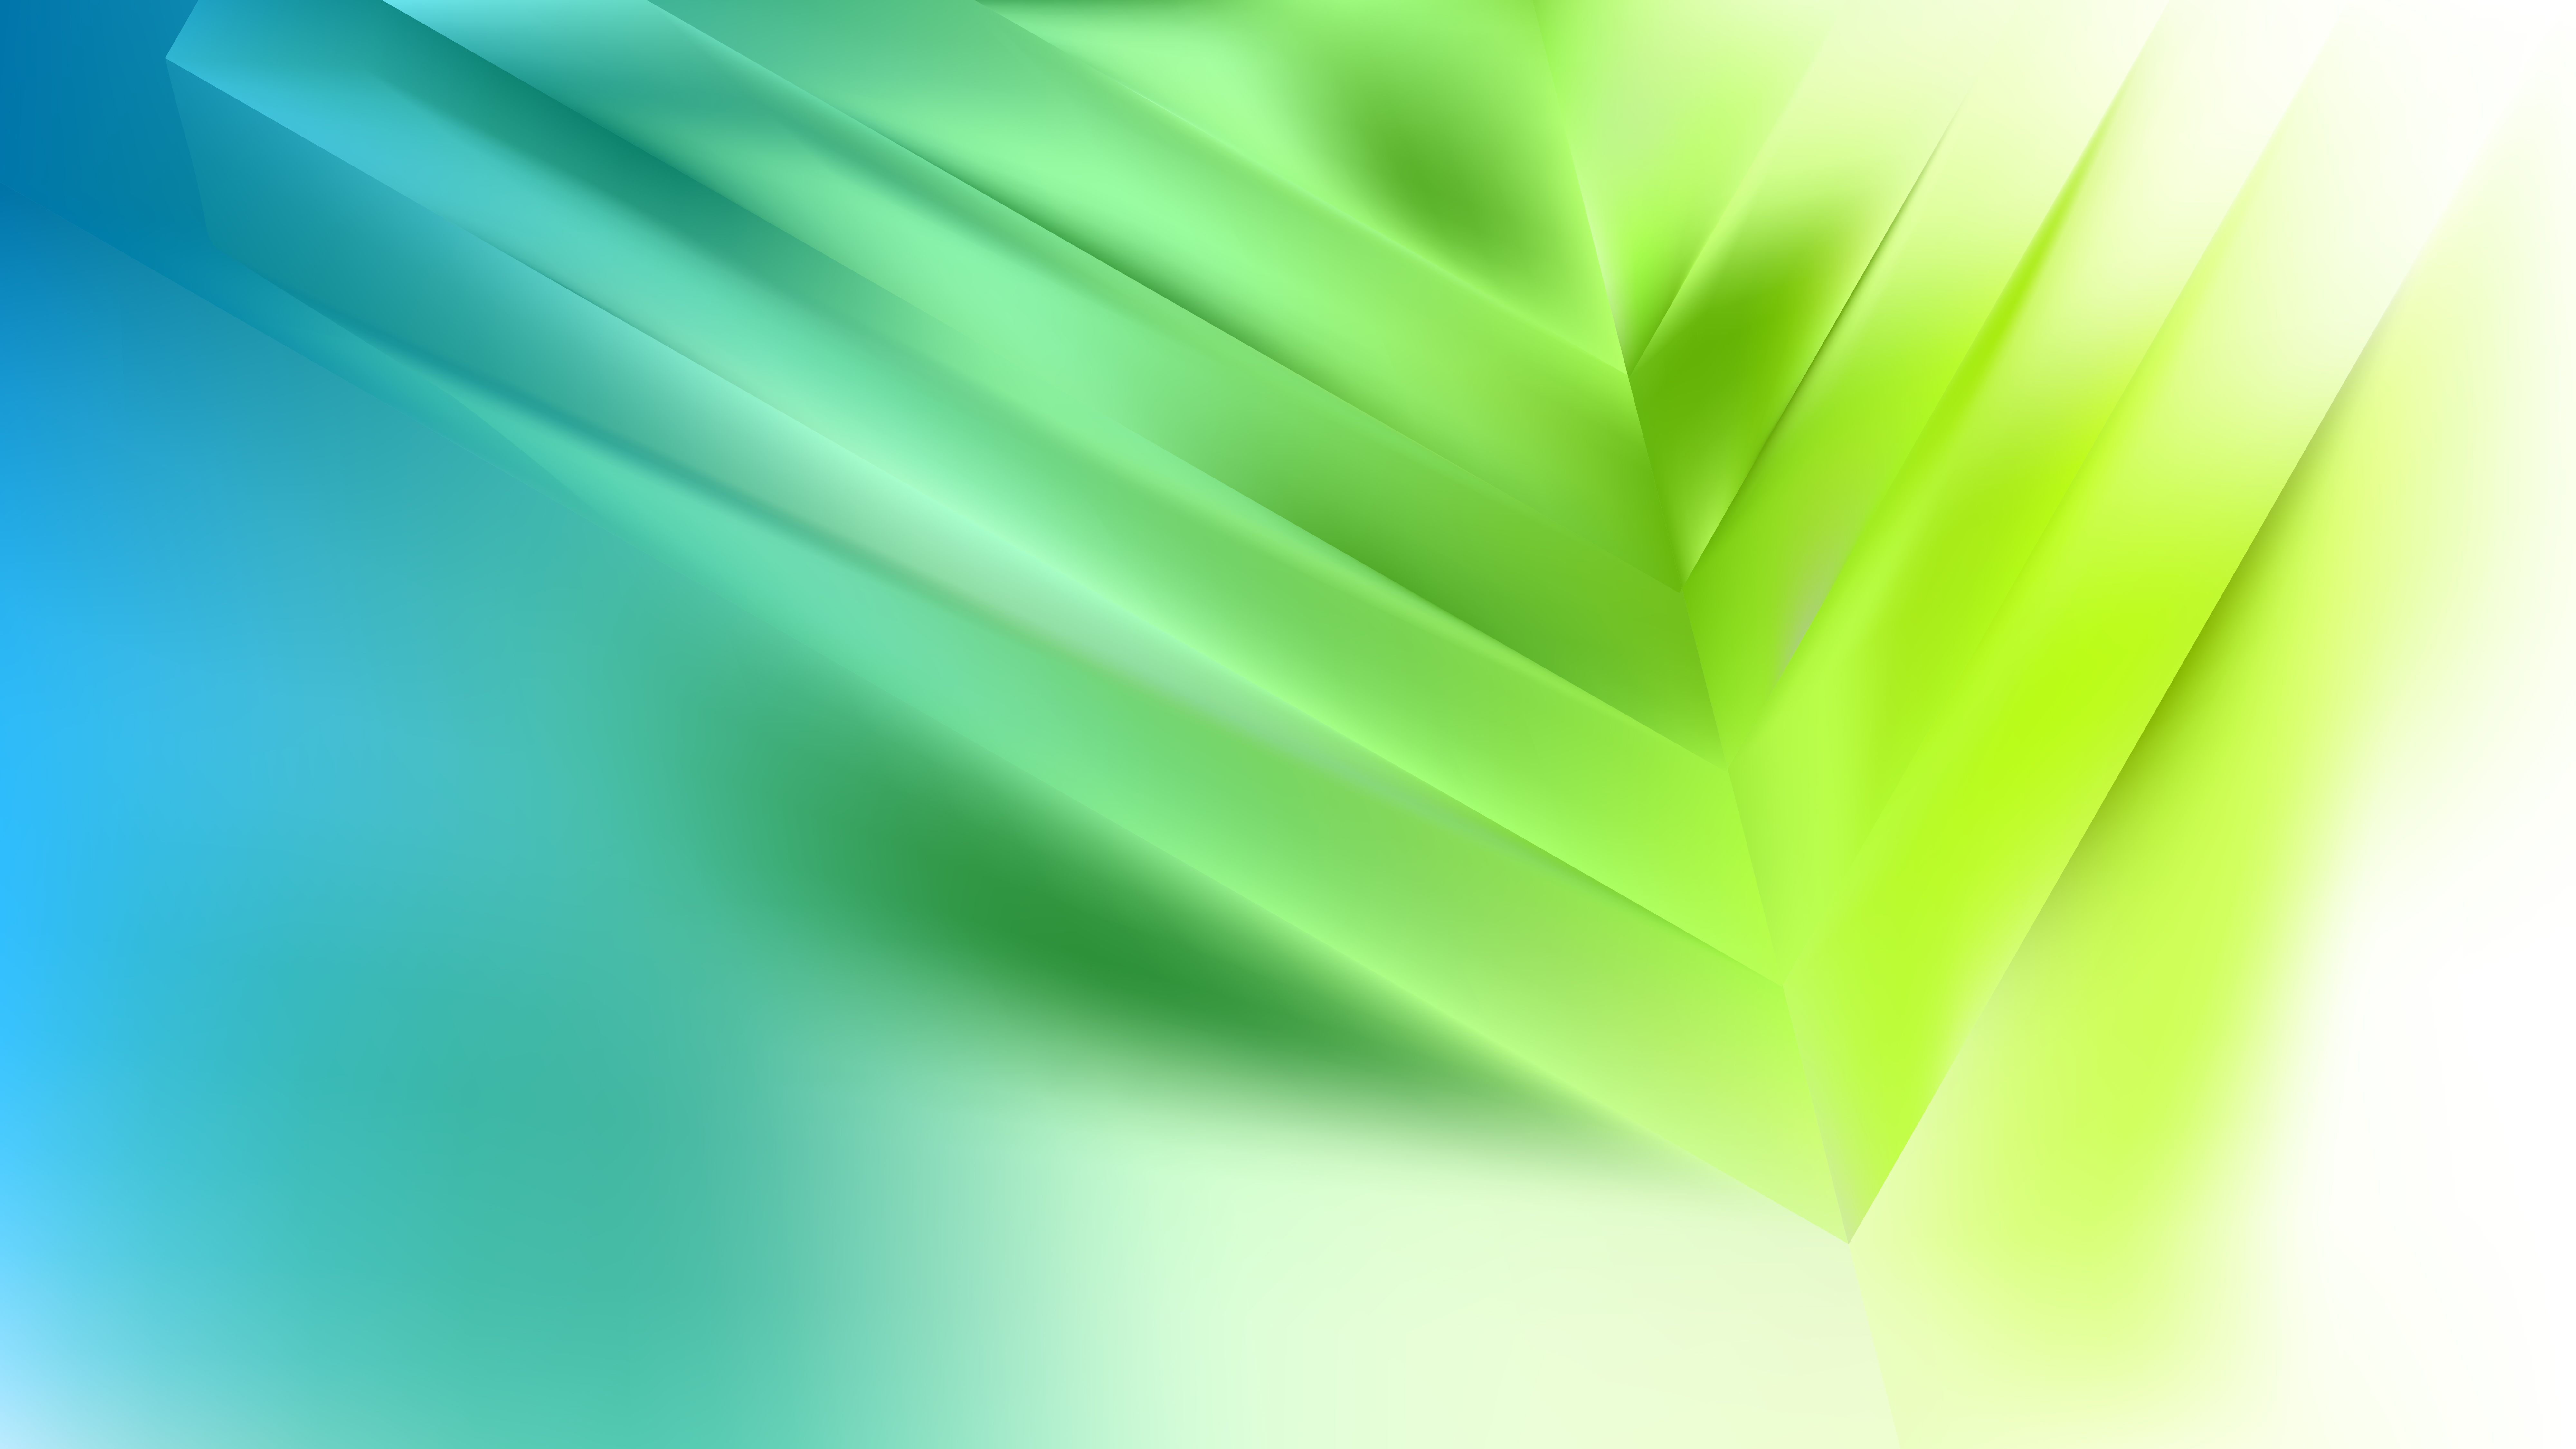 Free Abstract Blue Green and White Background Vector Illustration